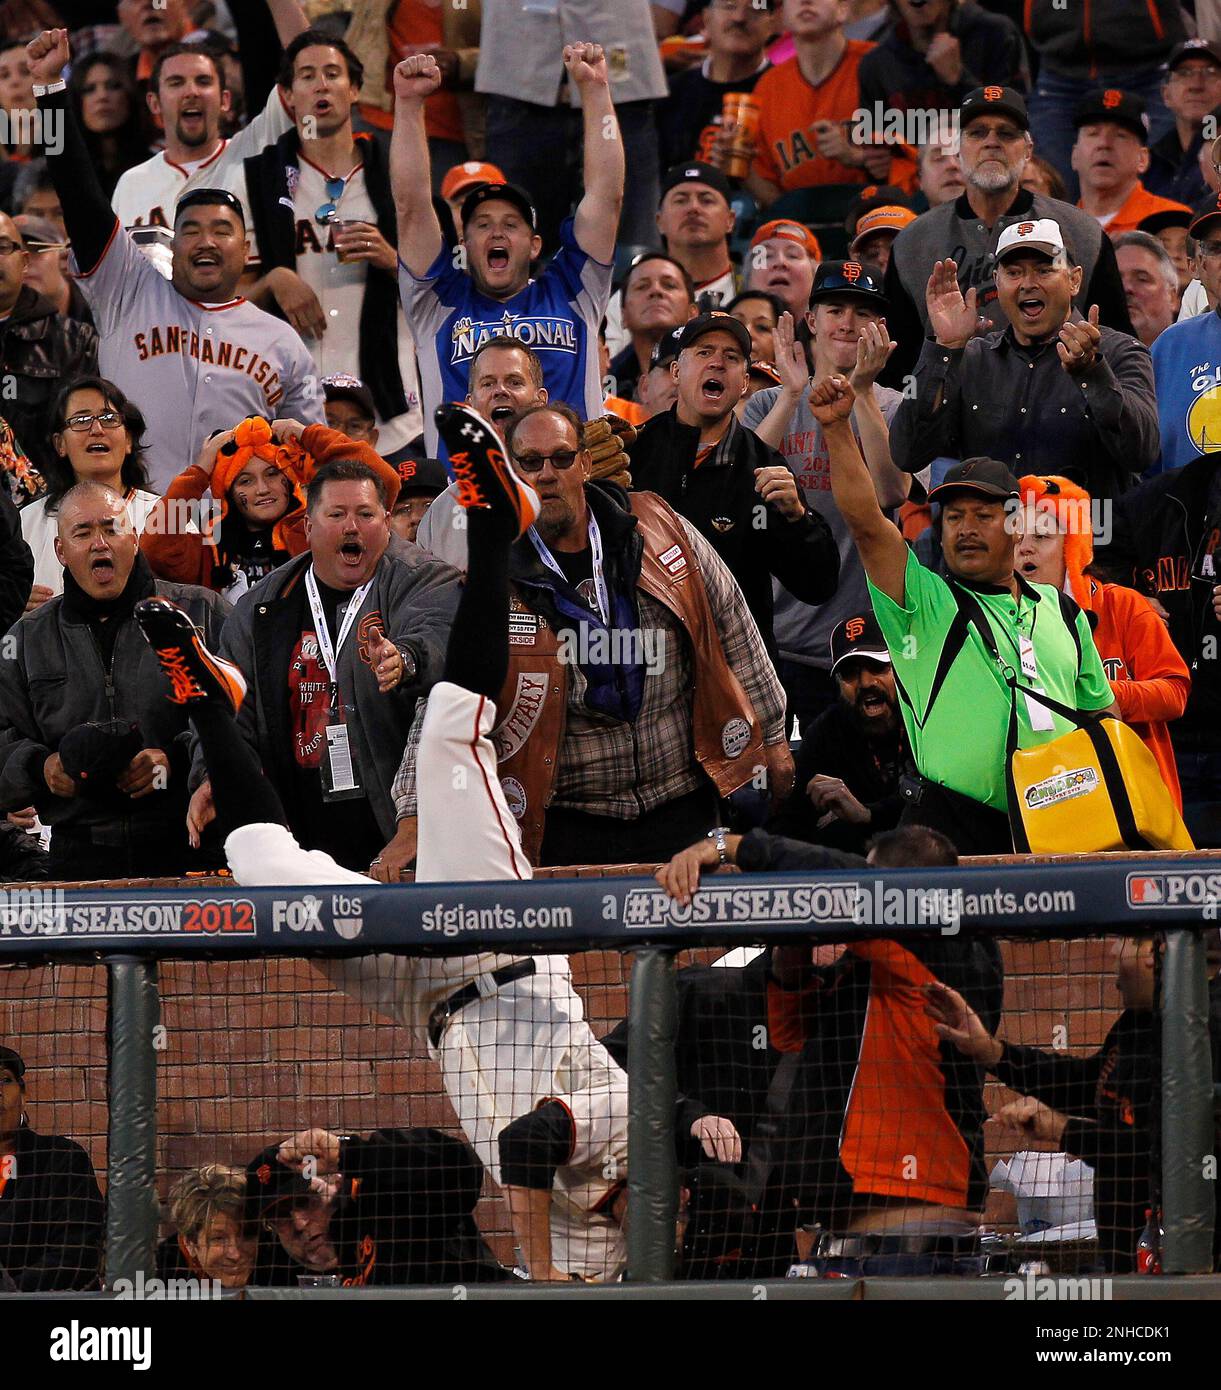 Giants' first baseman Brandon Belt falls over the rail and into